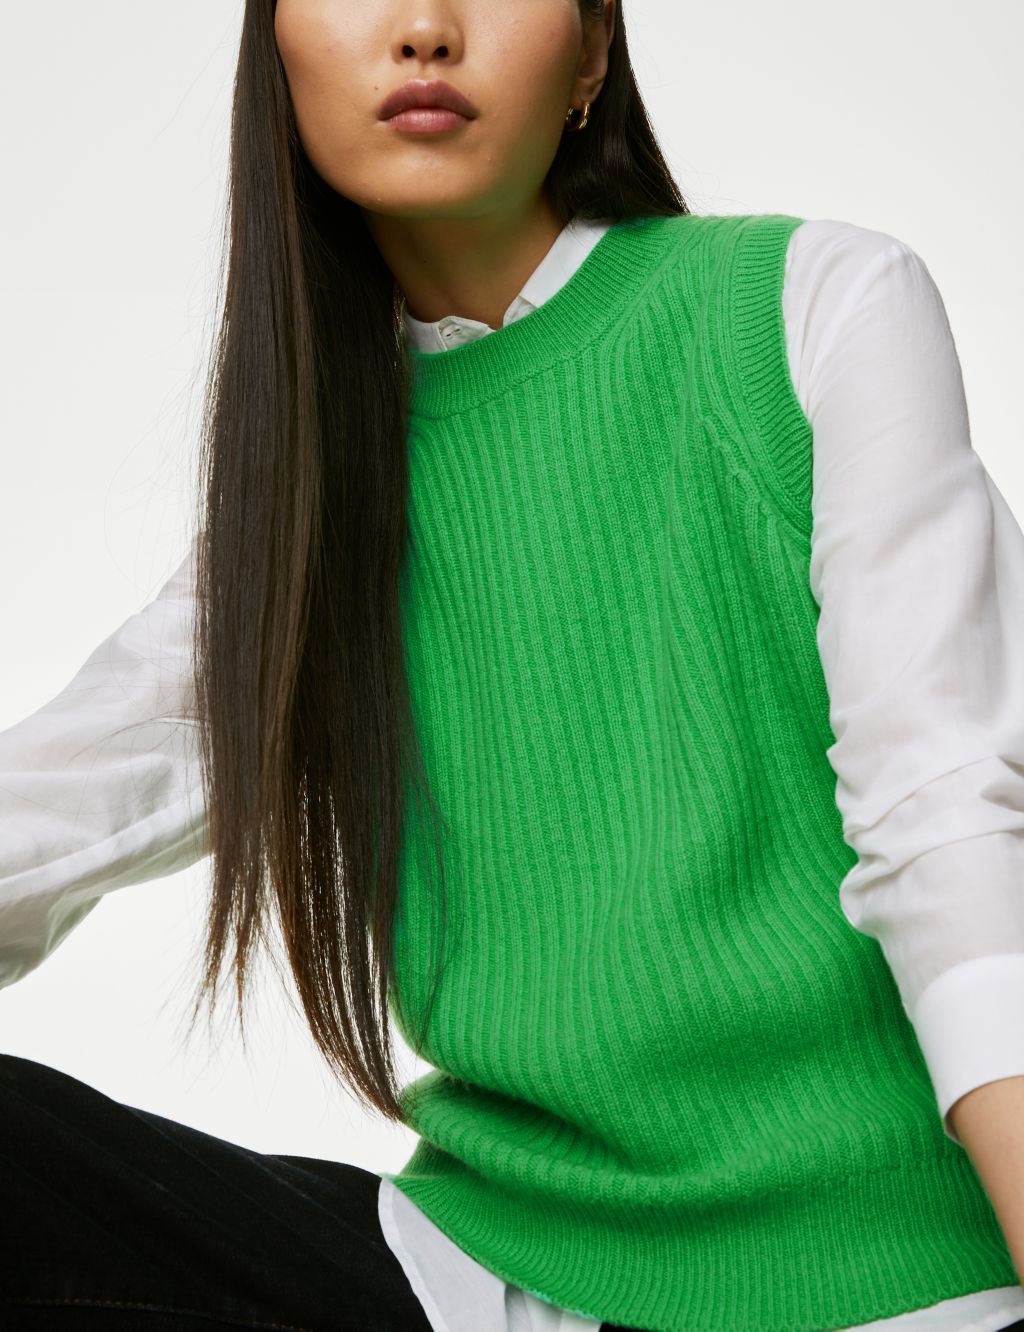 Merino Wool With Cashmere Knitted Vest image 1